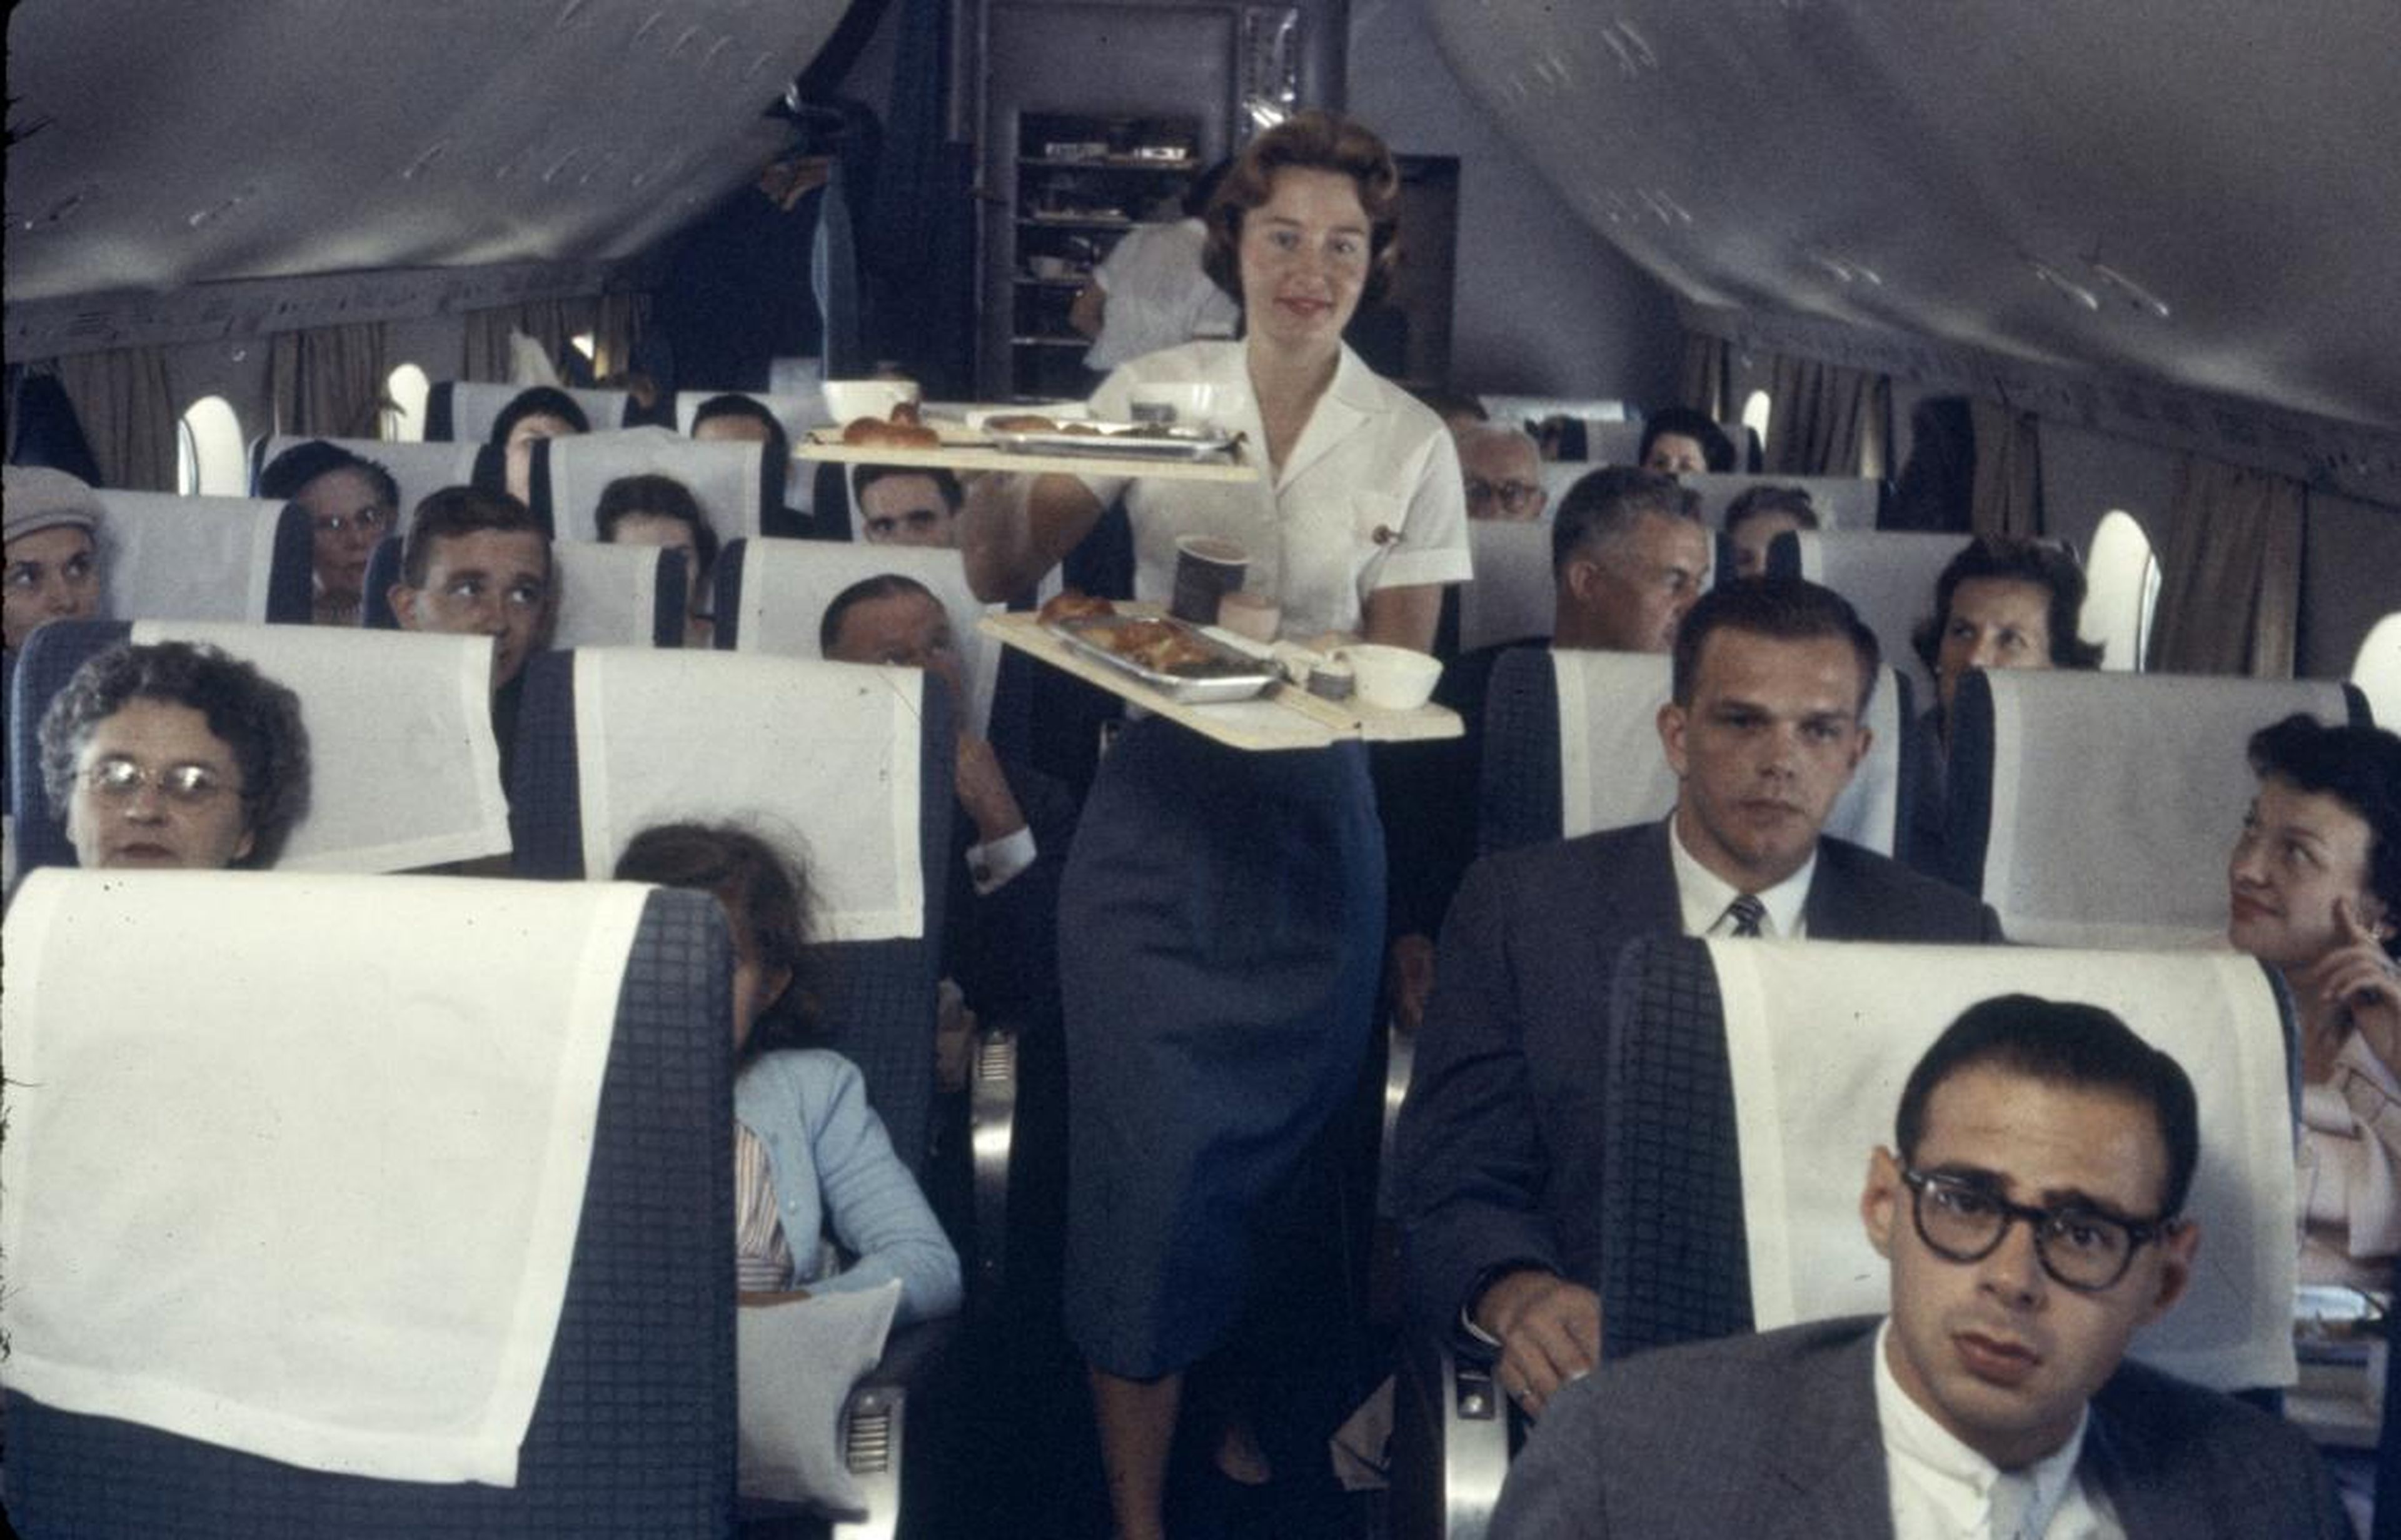 Let's talk about food. During the golden age of air travel, in-flight meals were the norm.